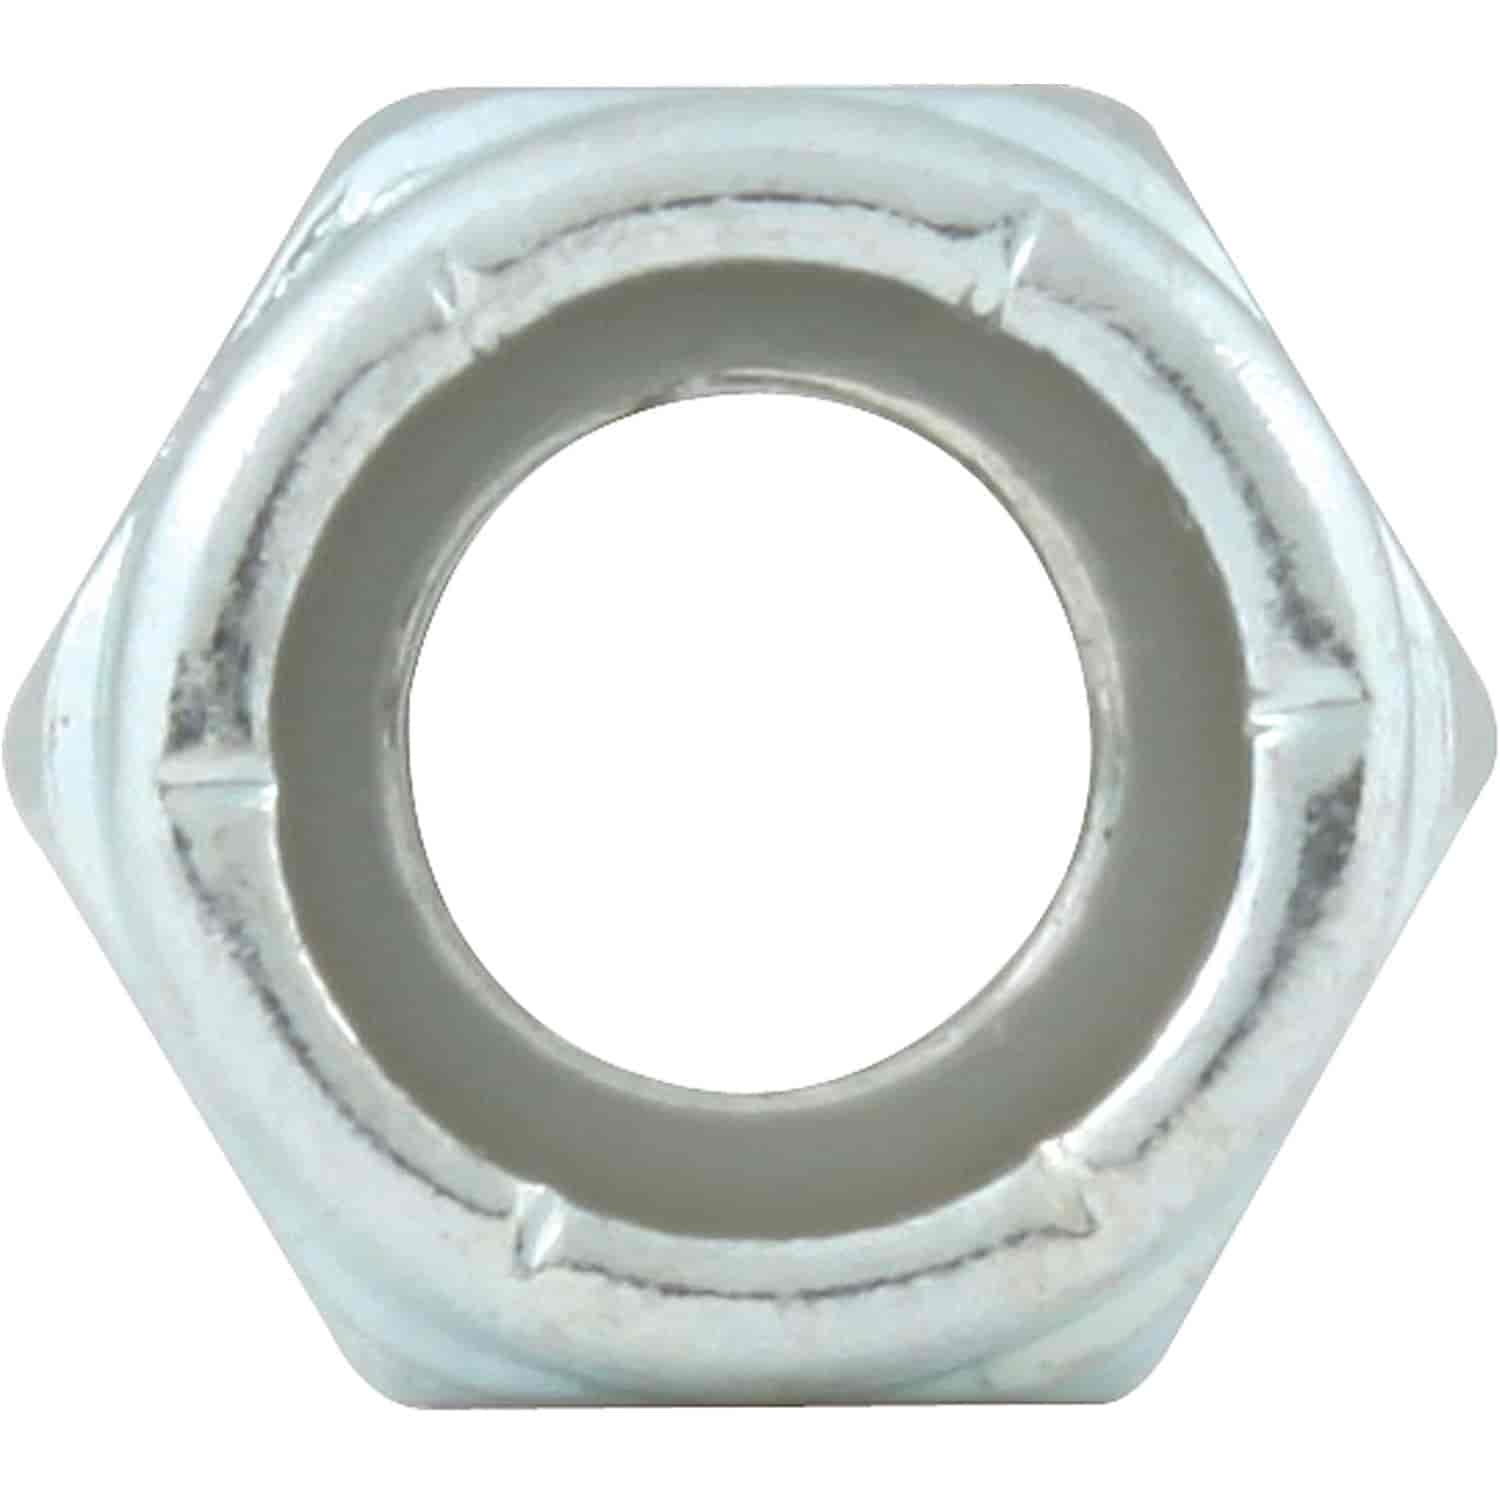 Coarse Thread Hex Nuts With Nylon Inserts 5/16"-18